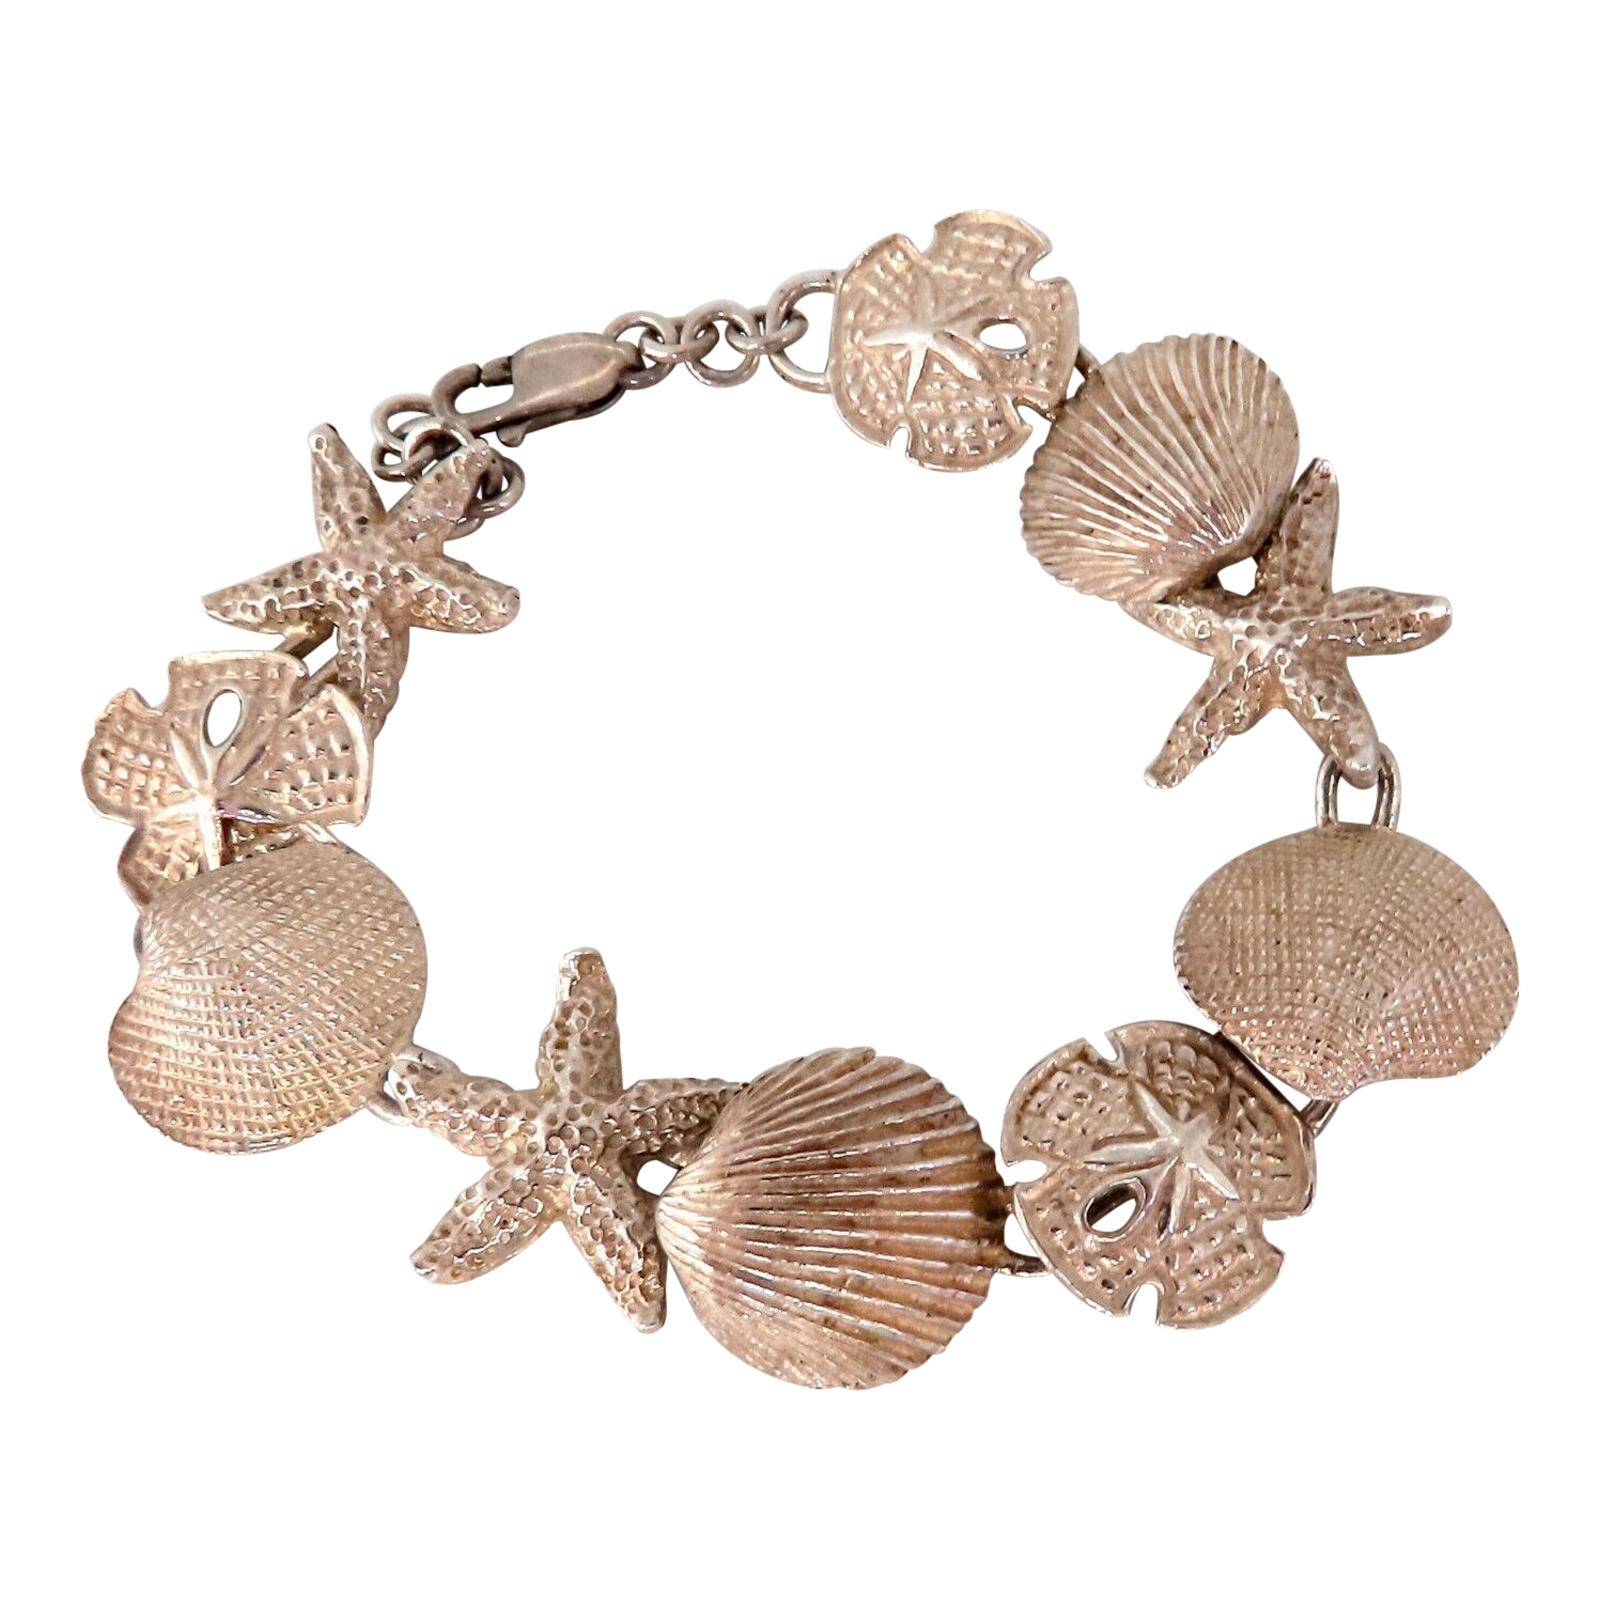 Sterling Silver Caribbean Charms Bracelet Sea Shells and Star Fish